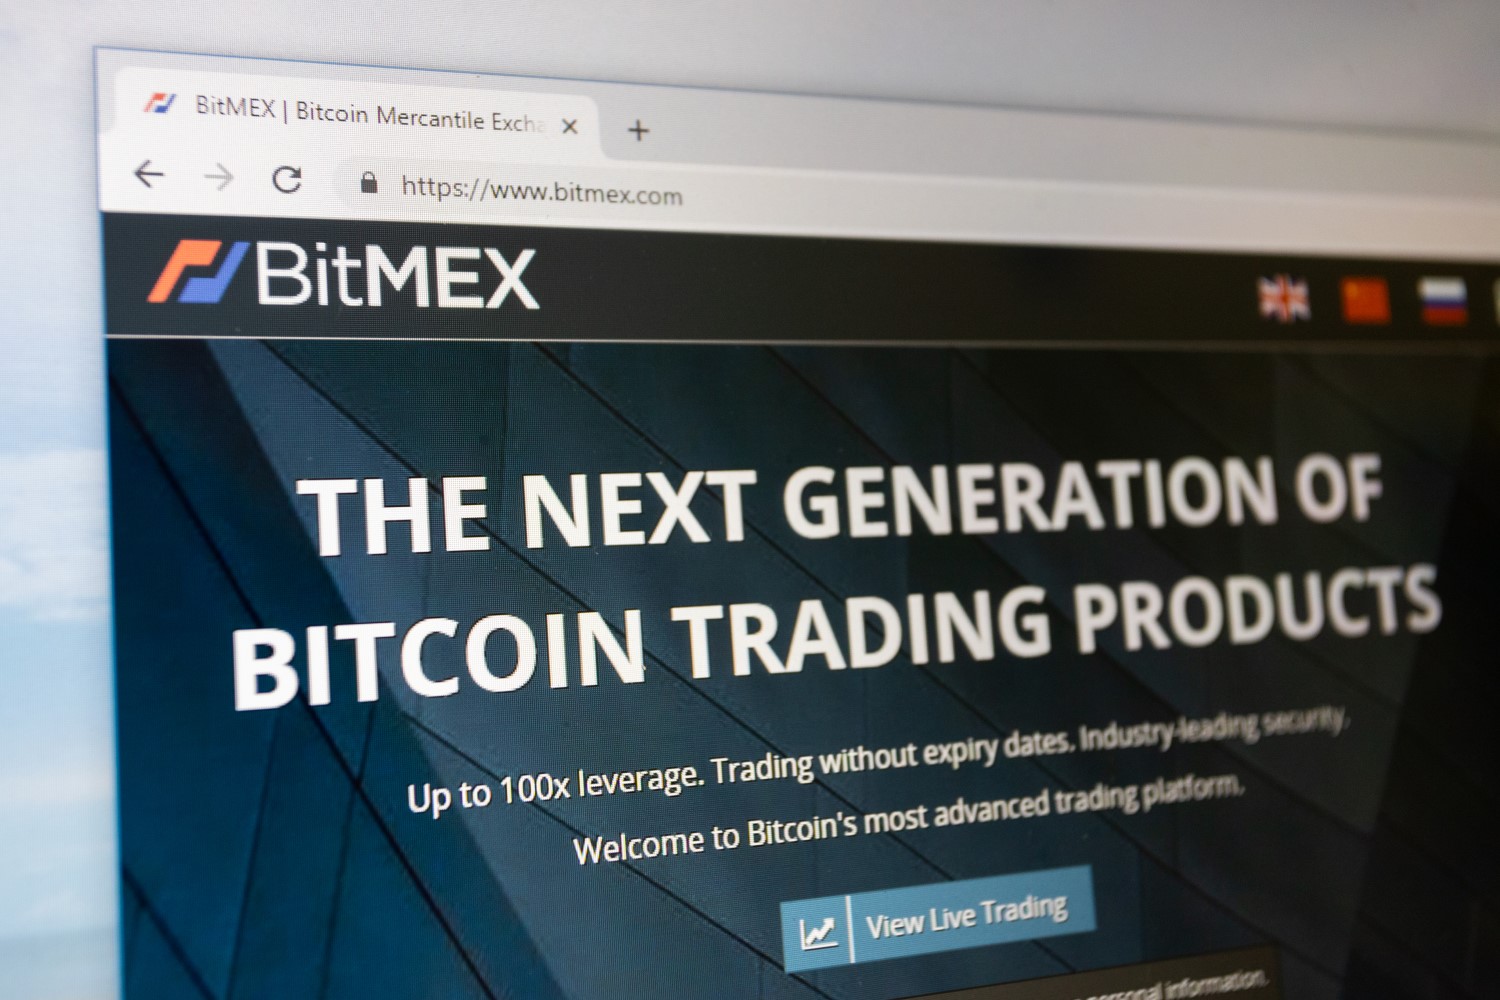 Bitmex-to-mandate-id-verification-for-all-traders-as-maverick-exchange-ends-wild-ways